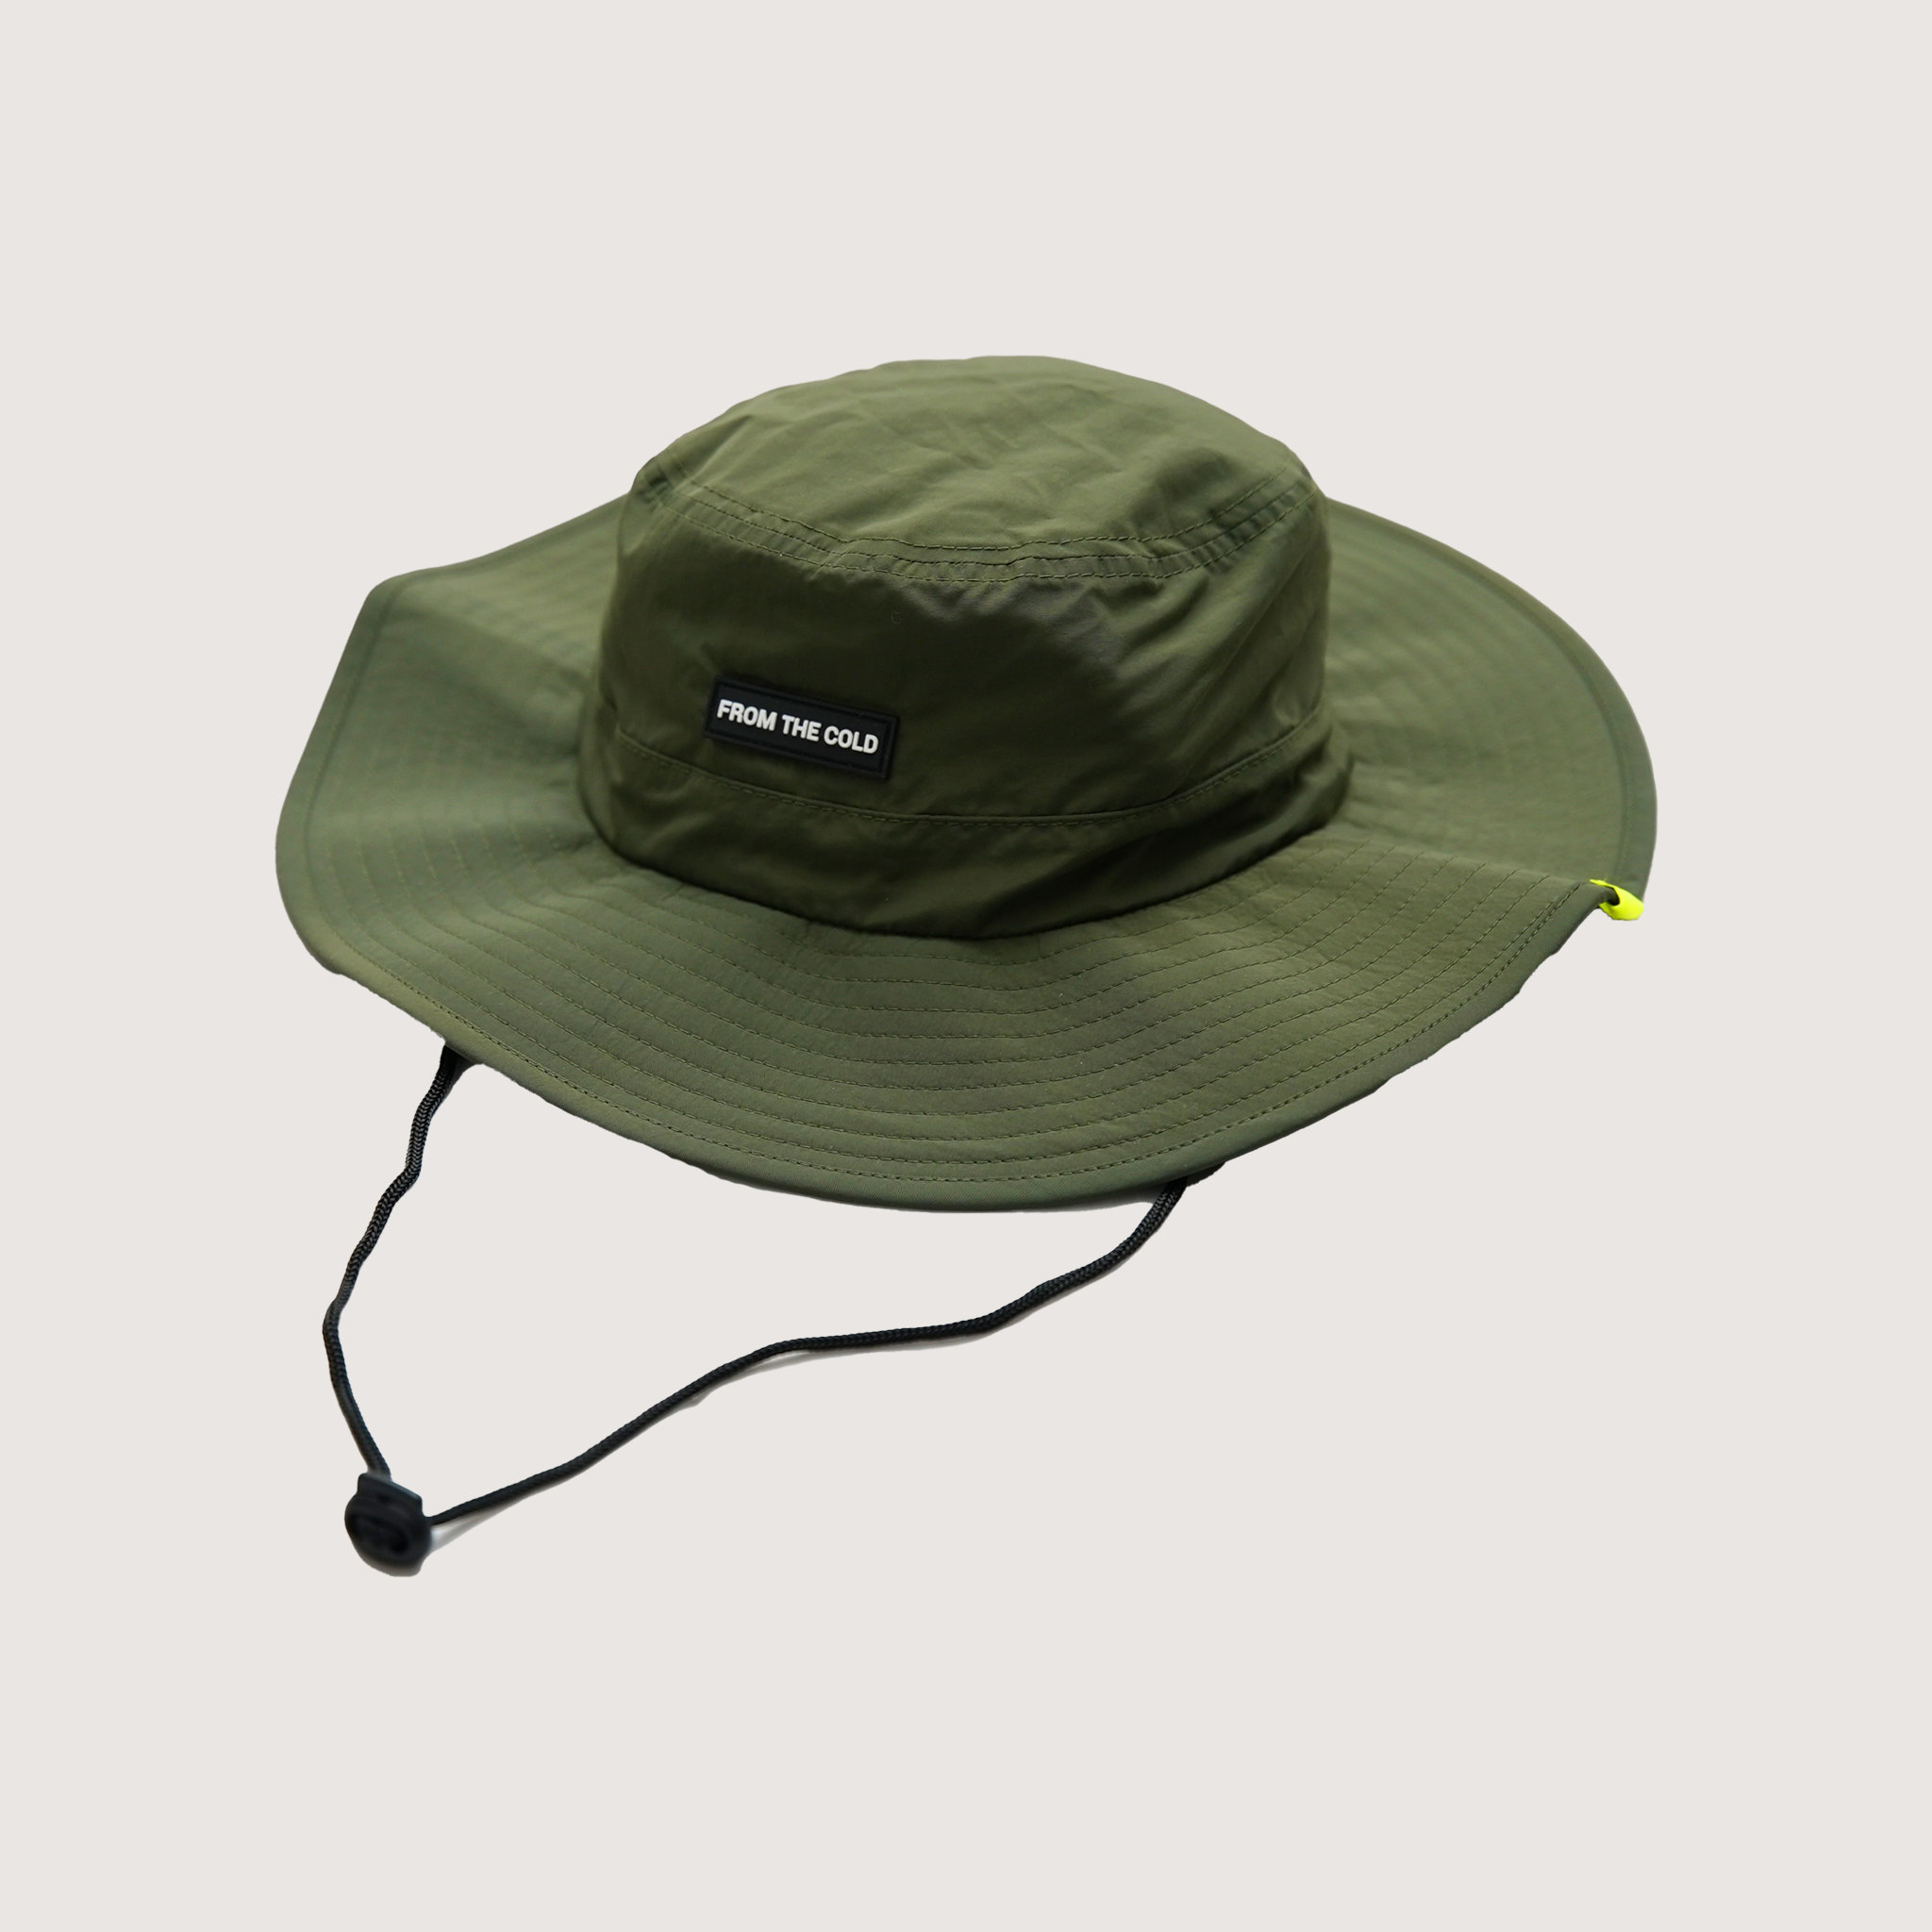 FROM THE COLD BOONIE HAT KHAKI